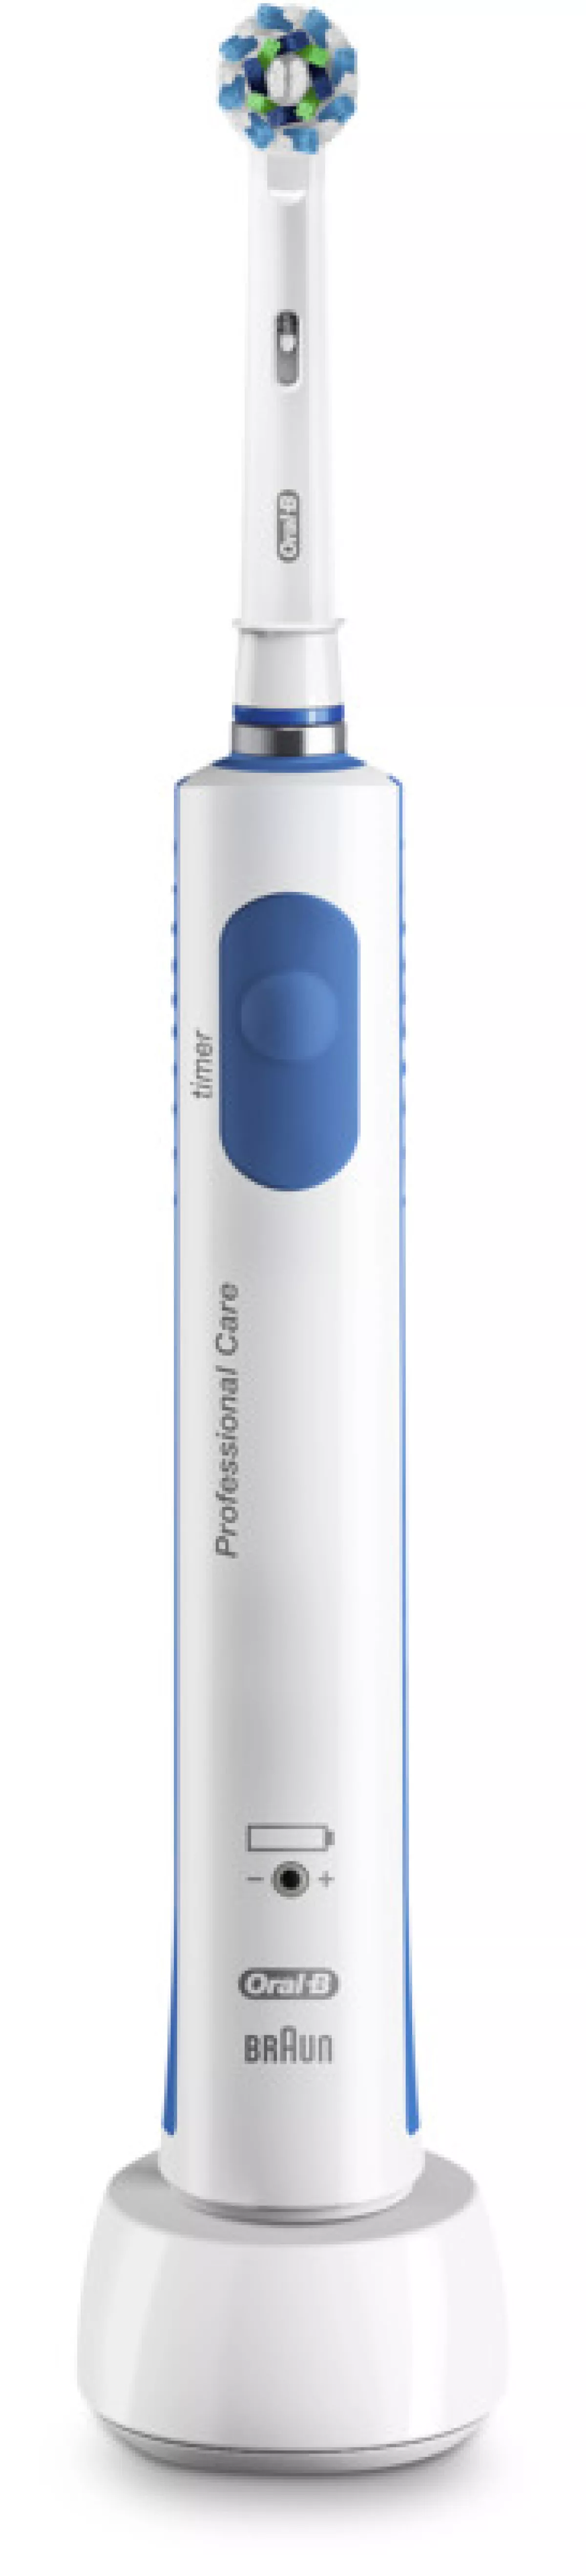 #2 - Oral B - Pro 600 Cross Action